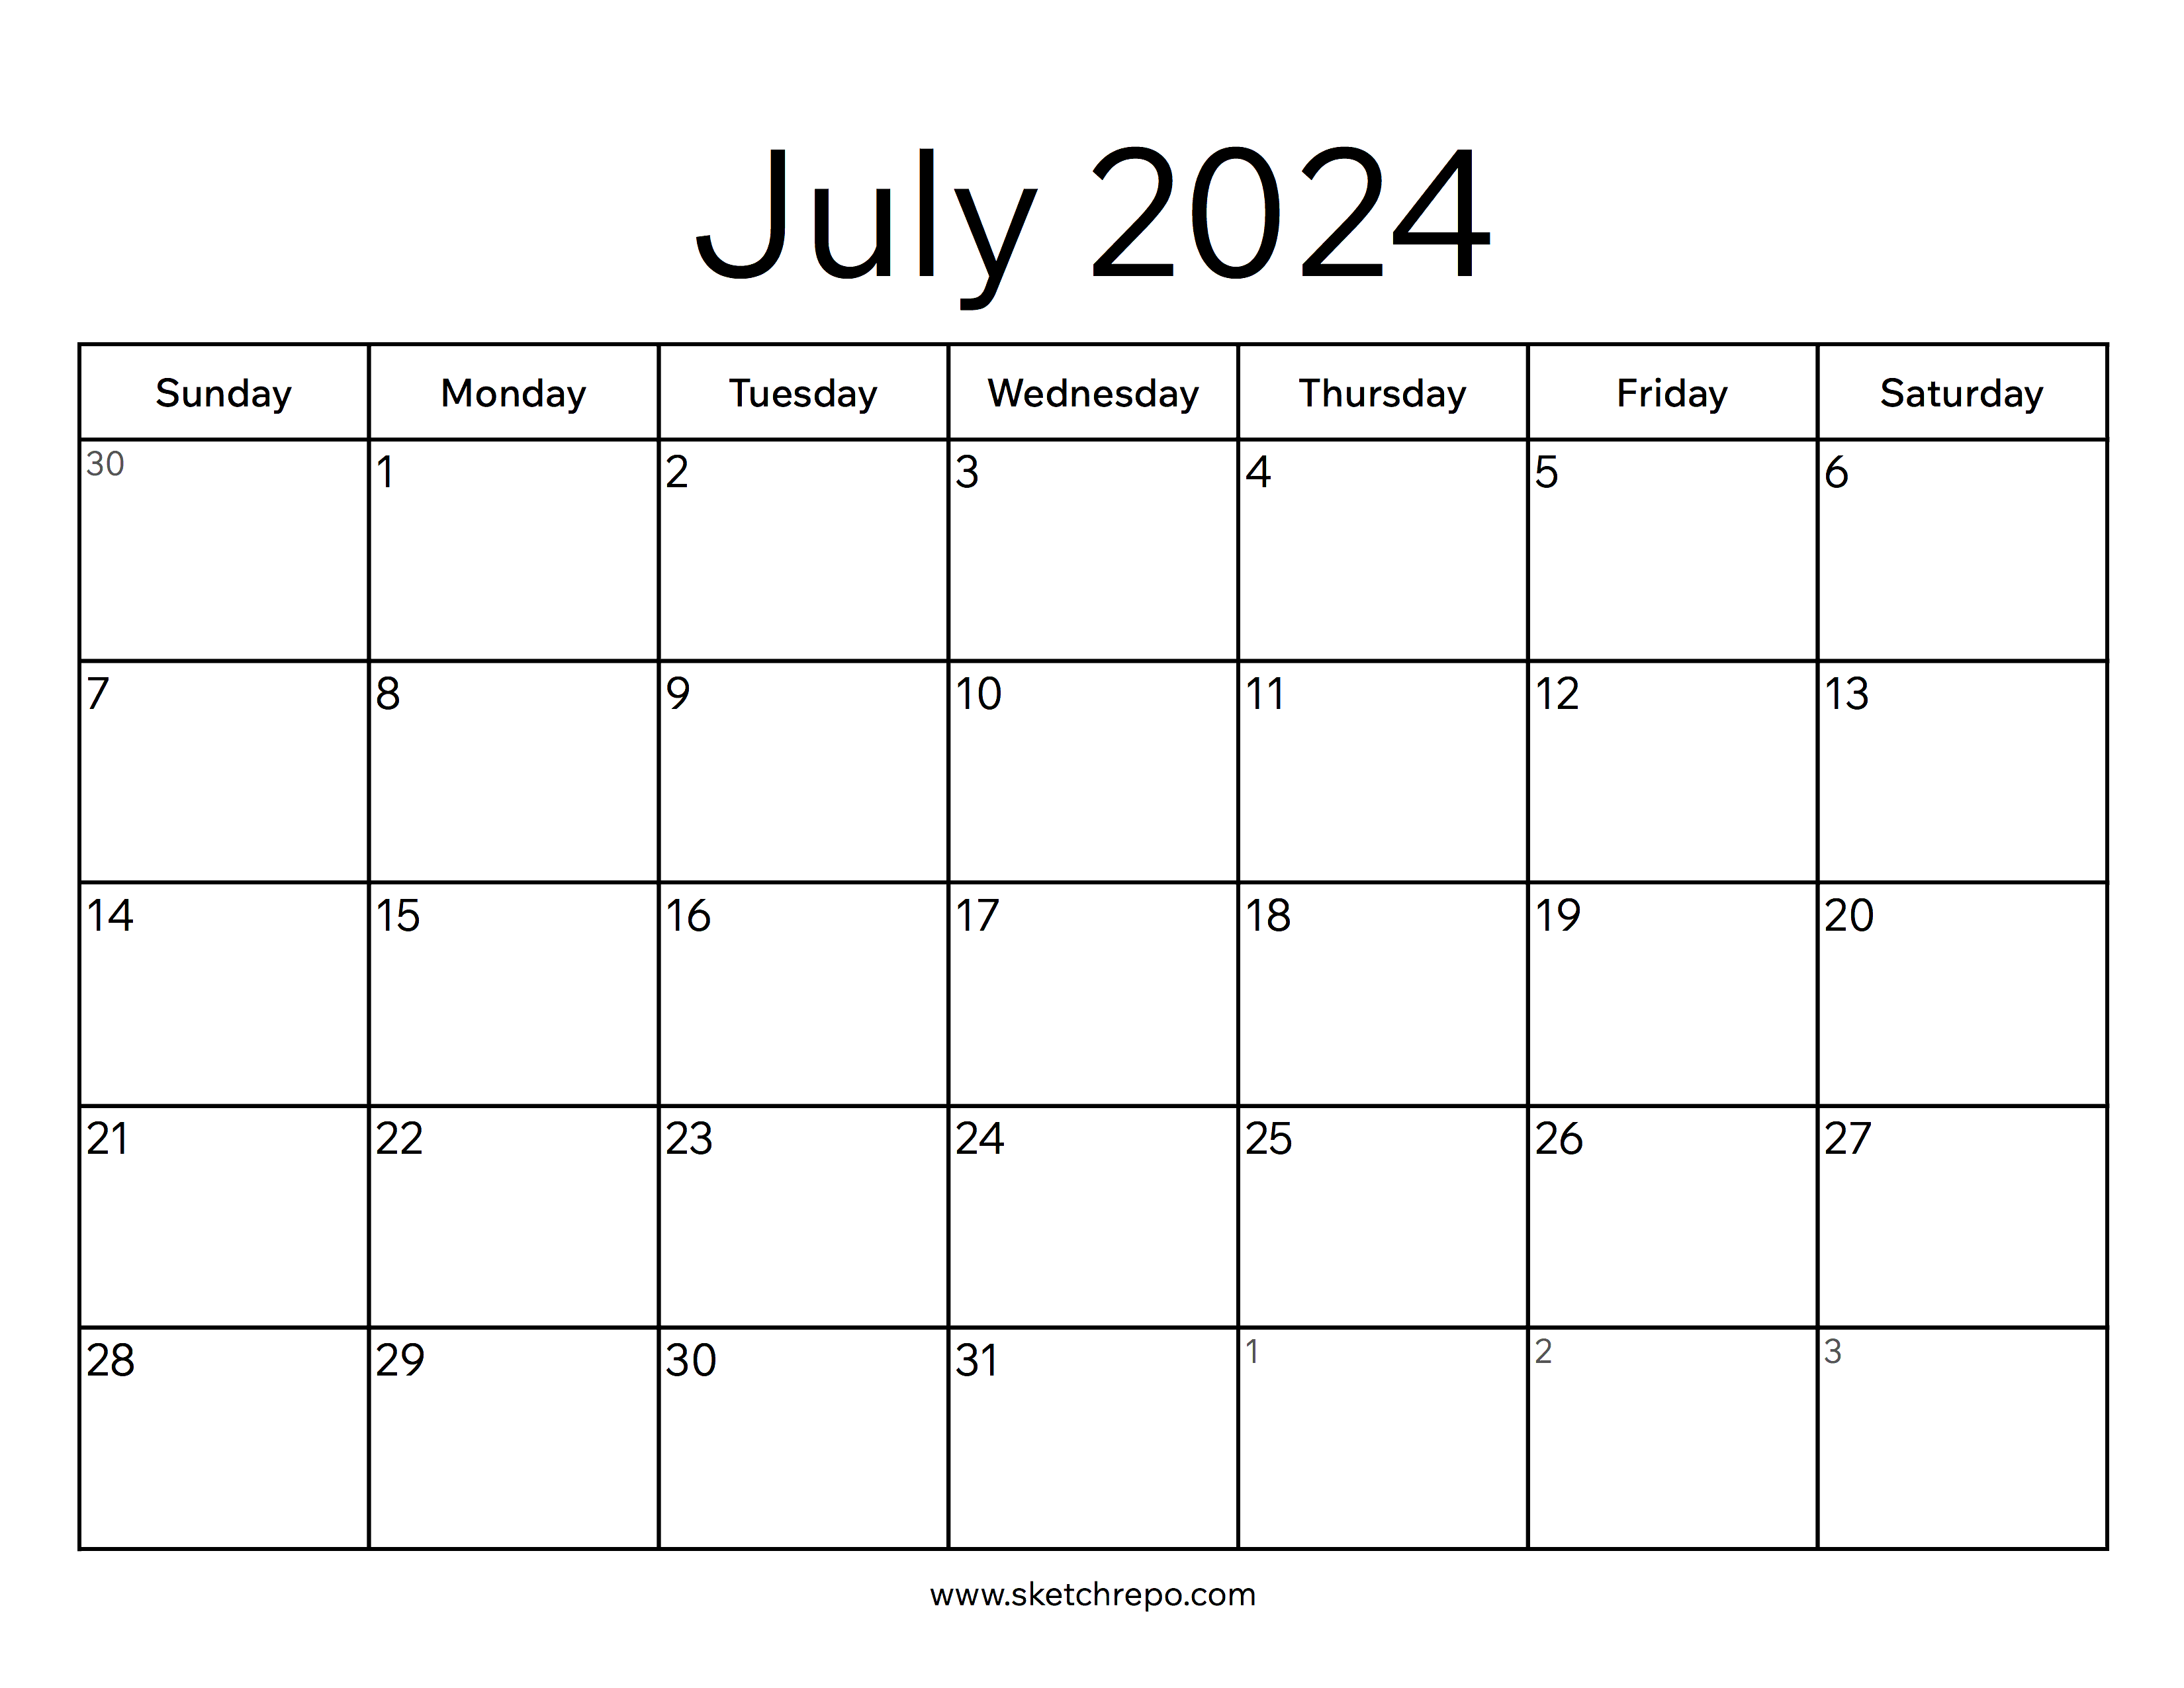 July 2024 Calendar – Sketch Repo for Calendar For July This Year 2024